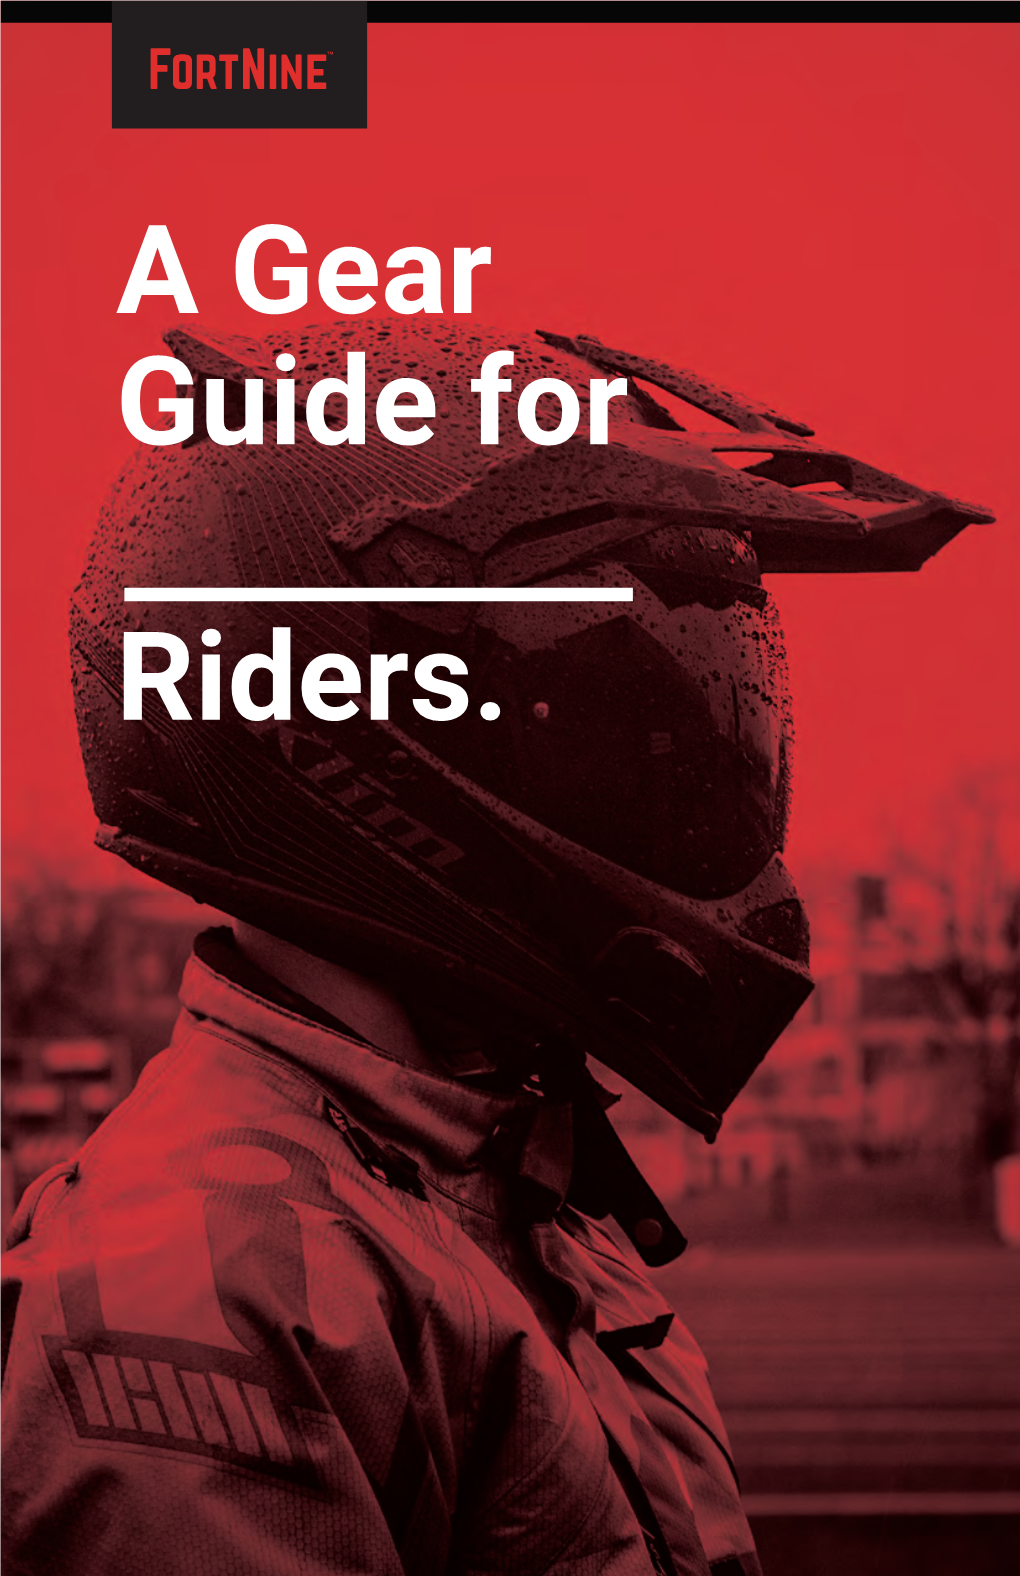 A Gear Guide for Riders